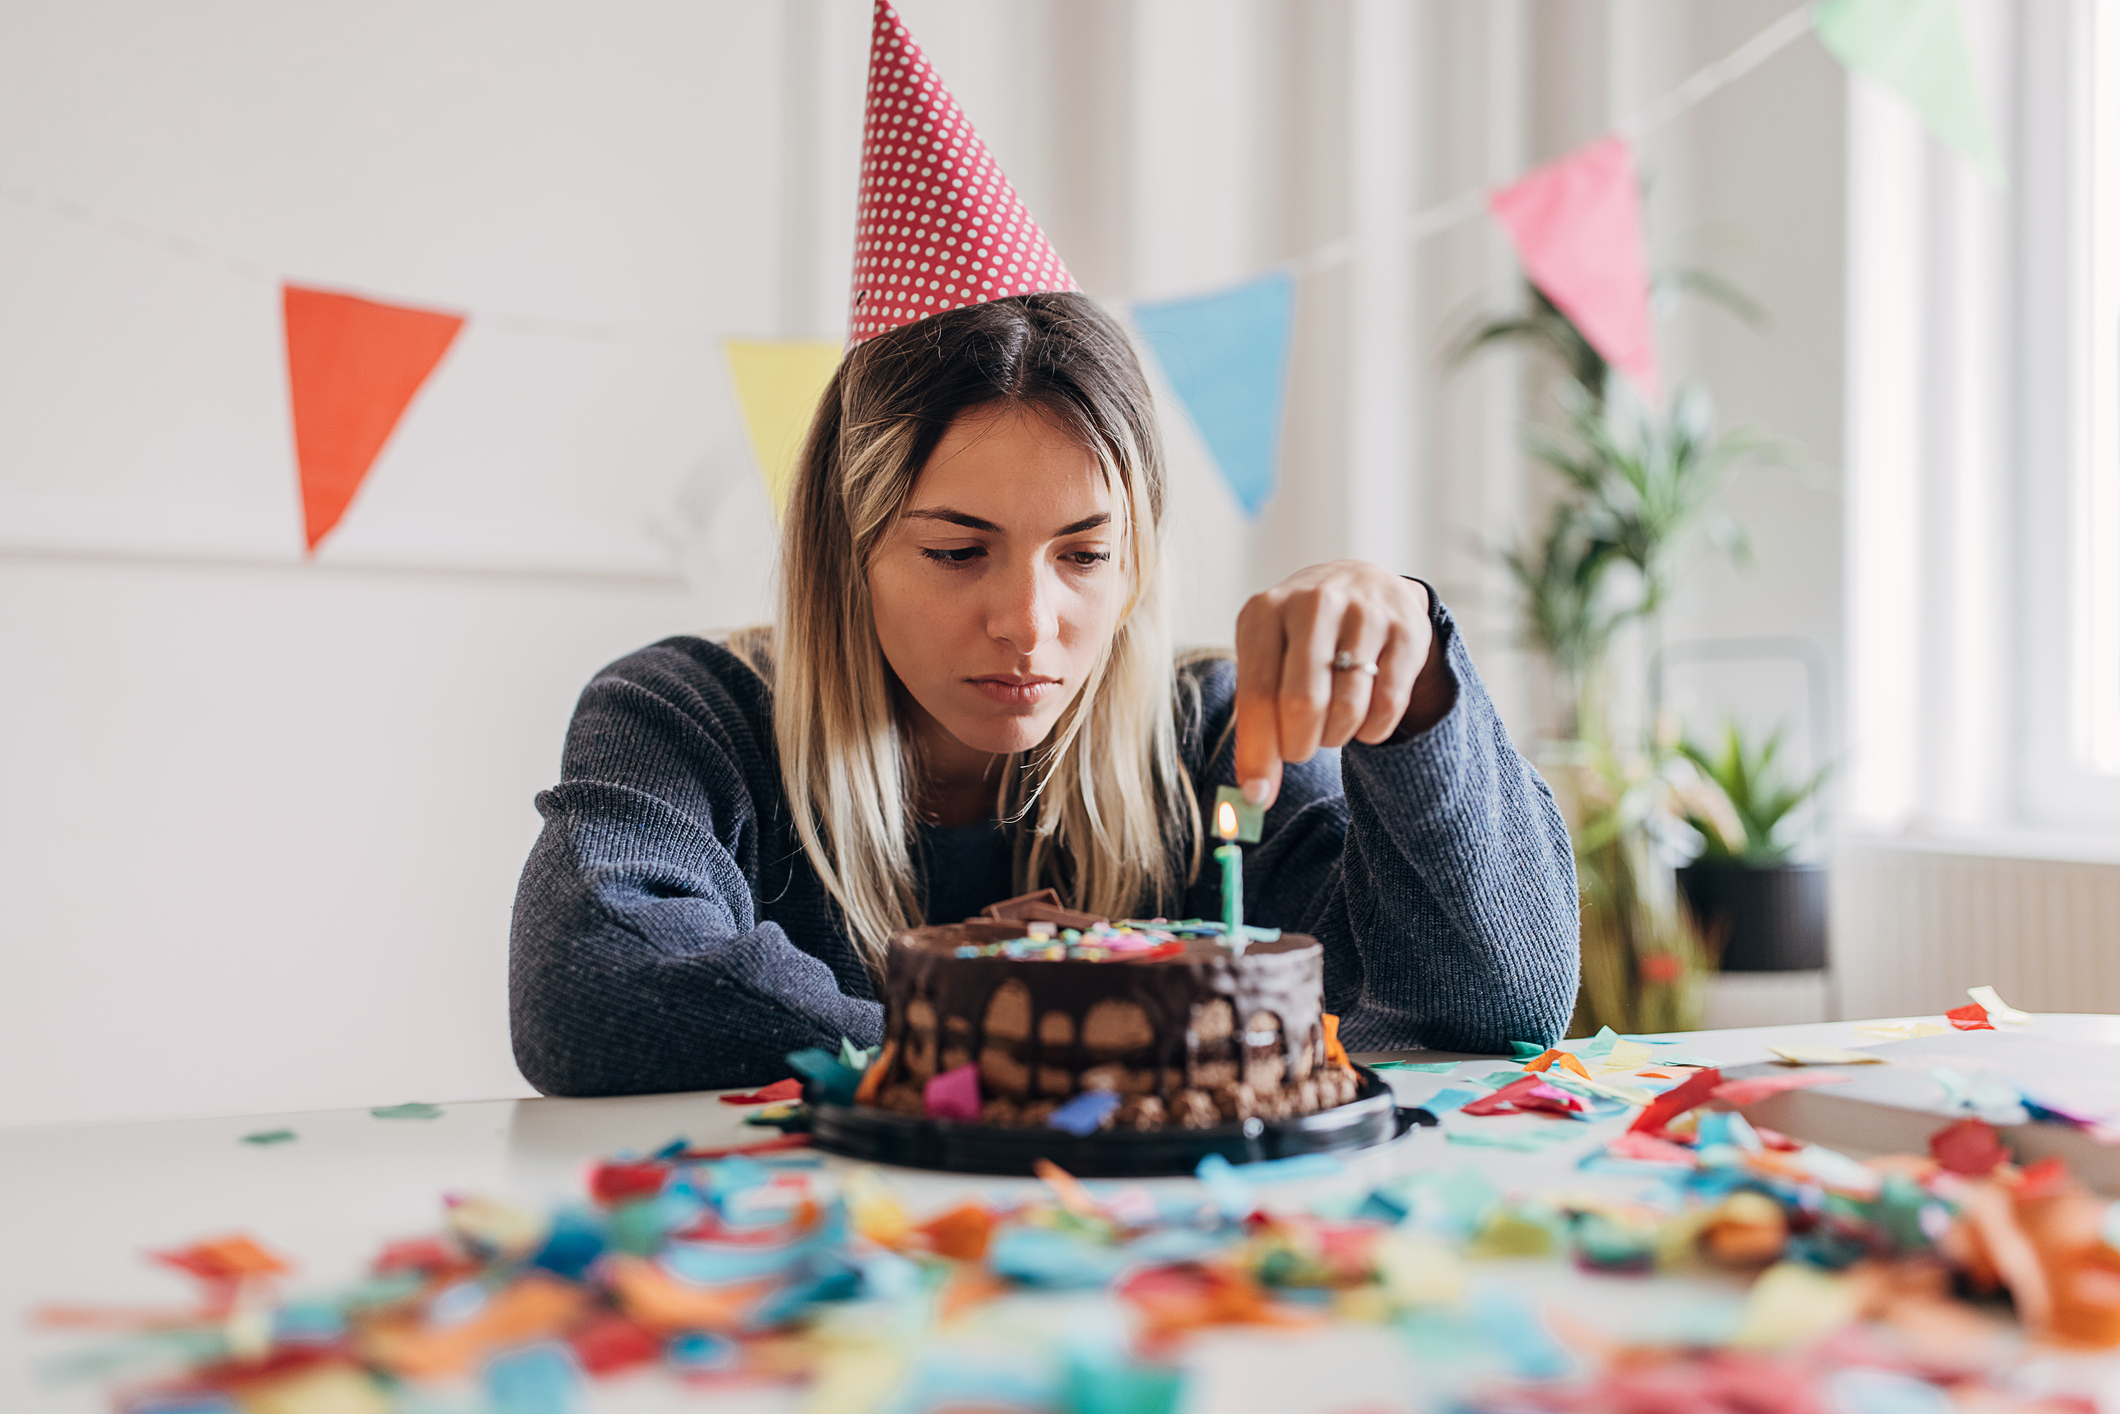 woman sitting by herself with a birthday cake